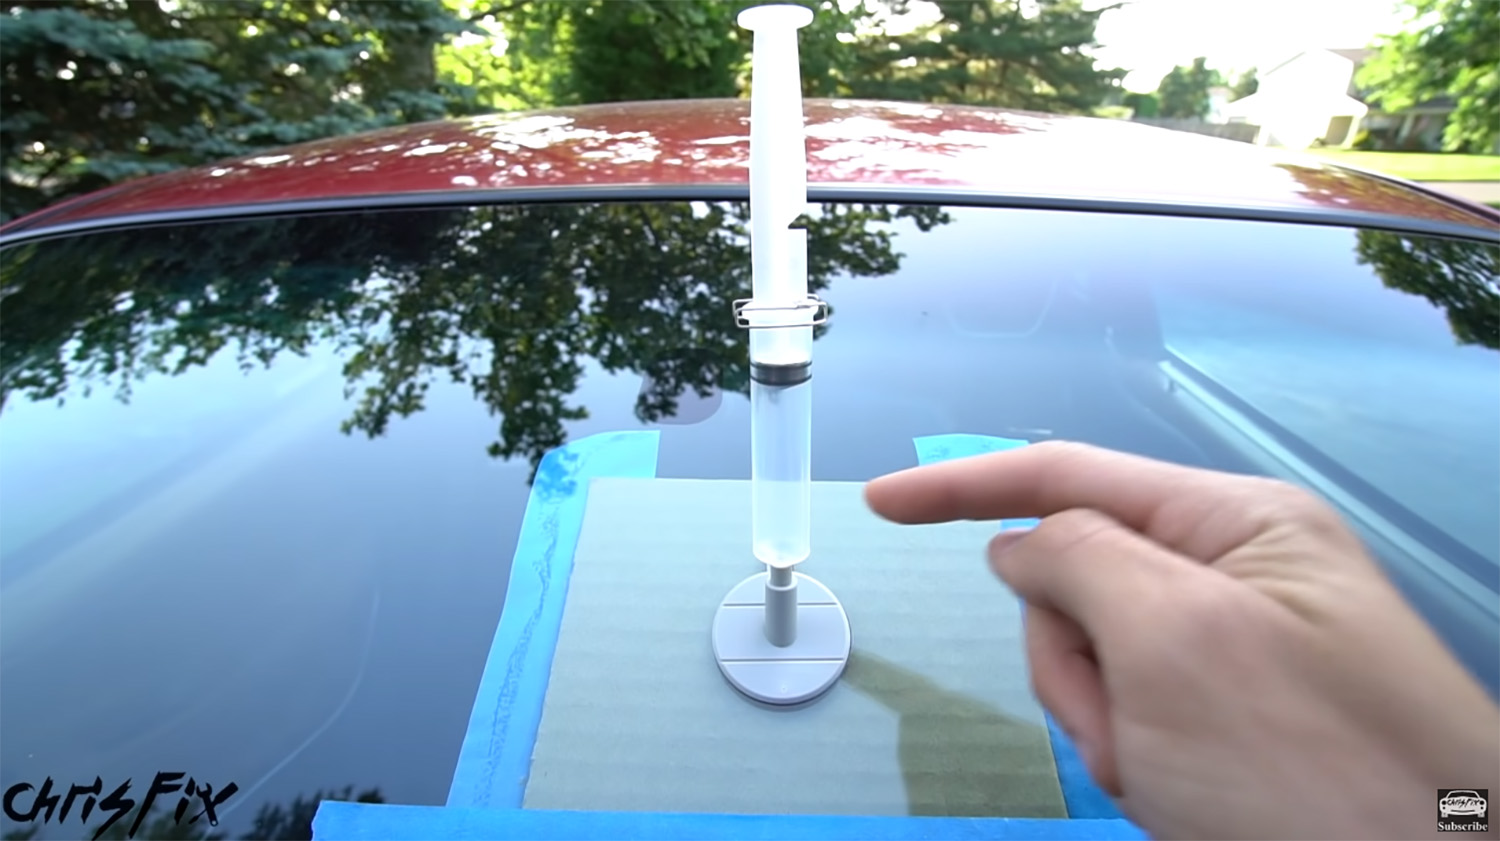 Diy Windshield Repair Fix Rock Chips For 20 In An Hour